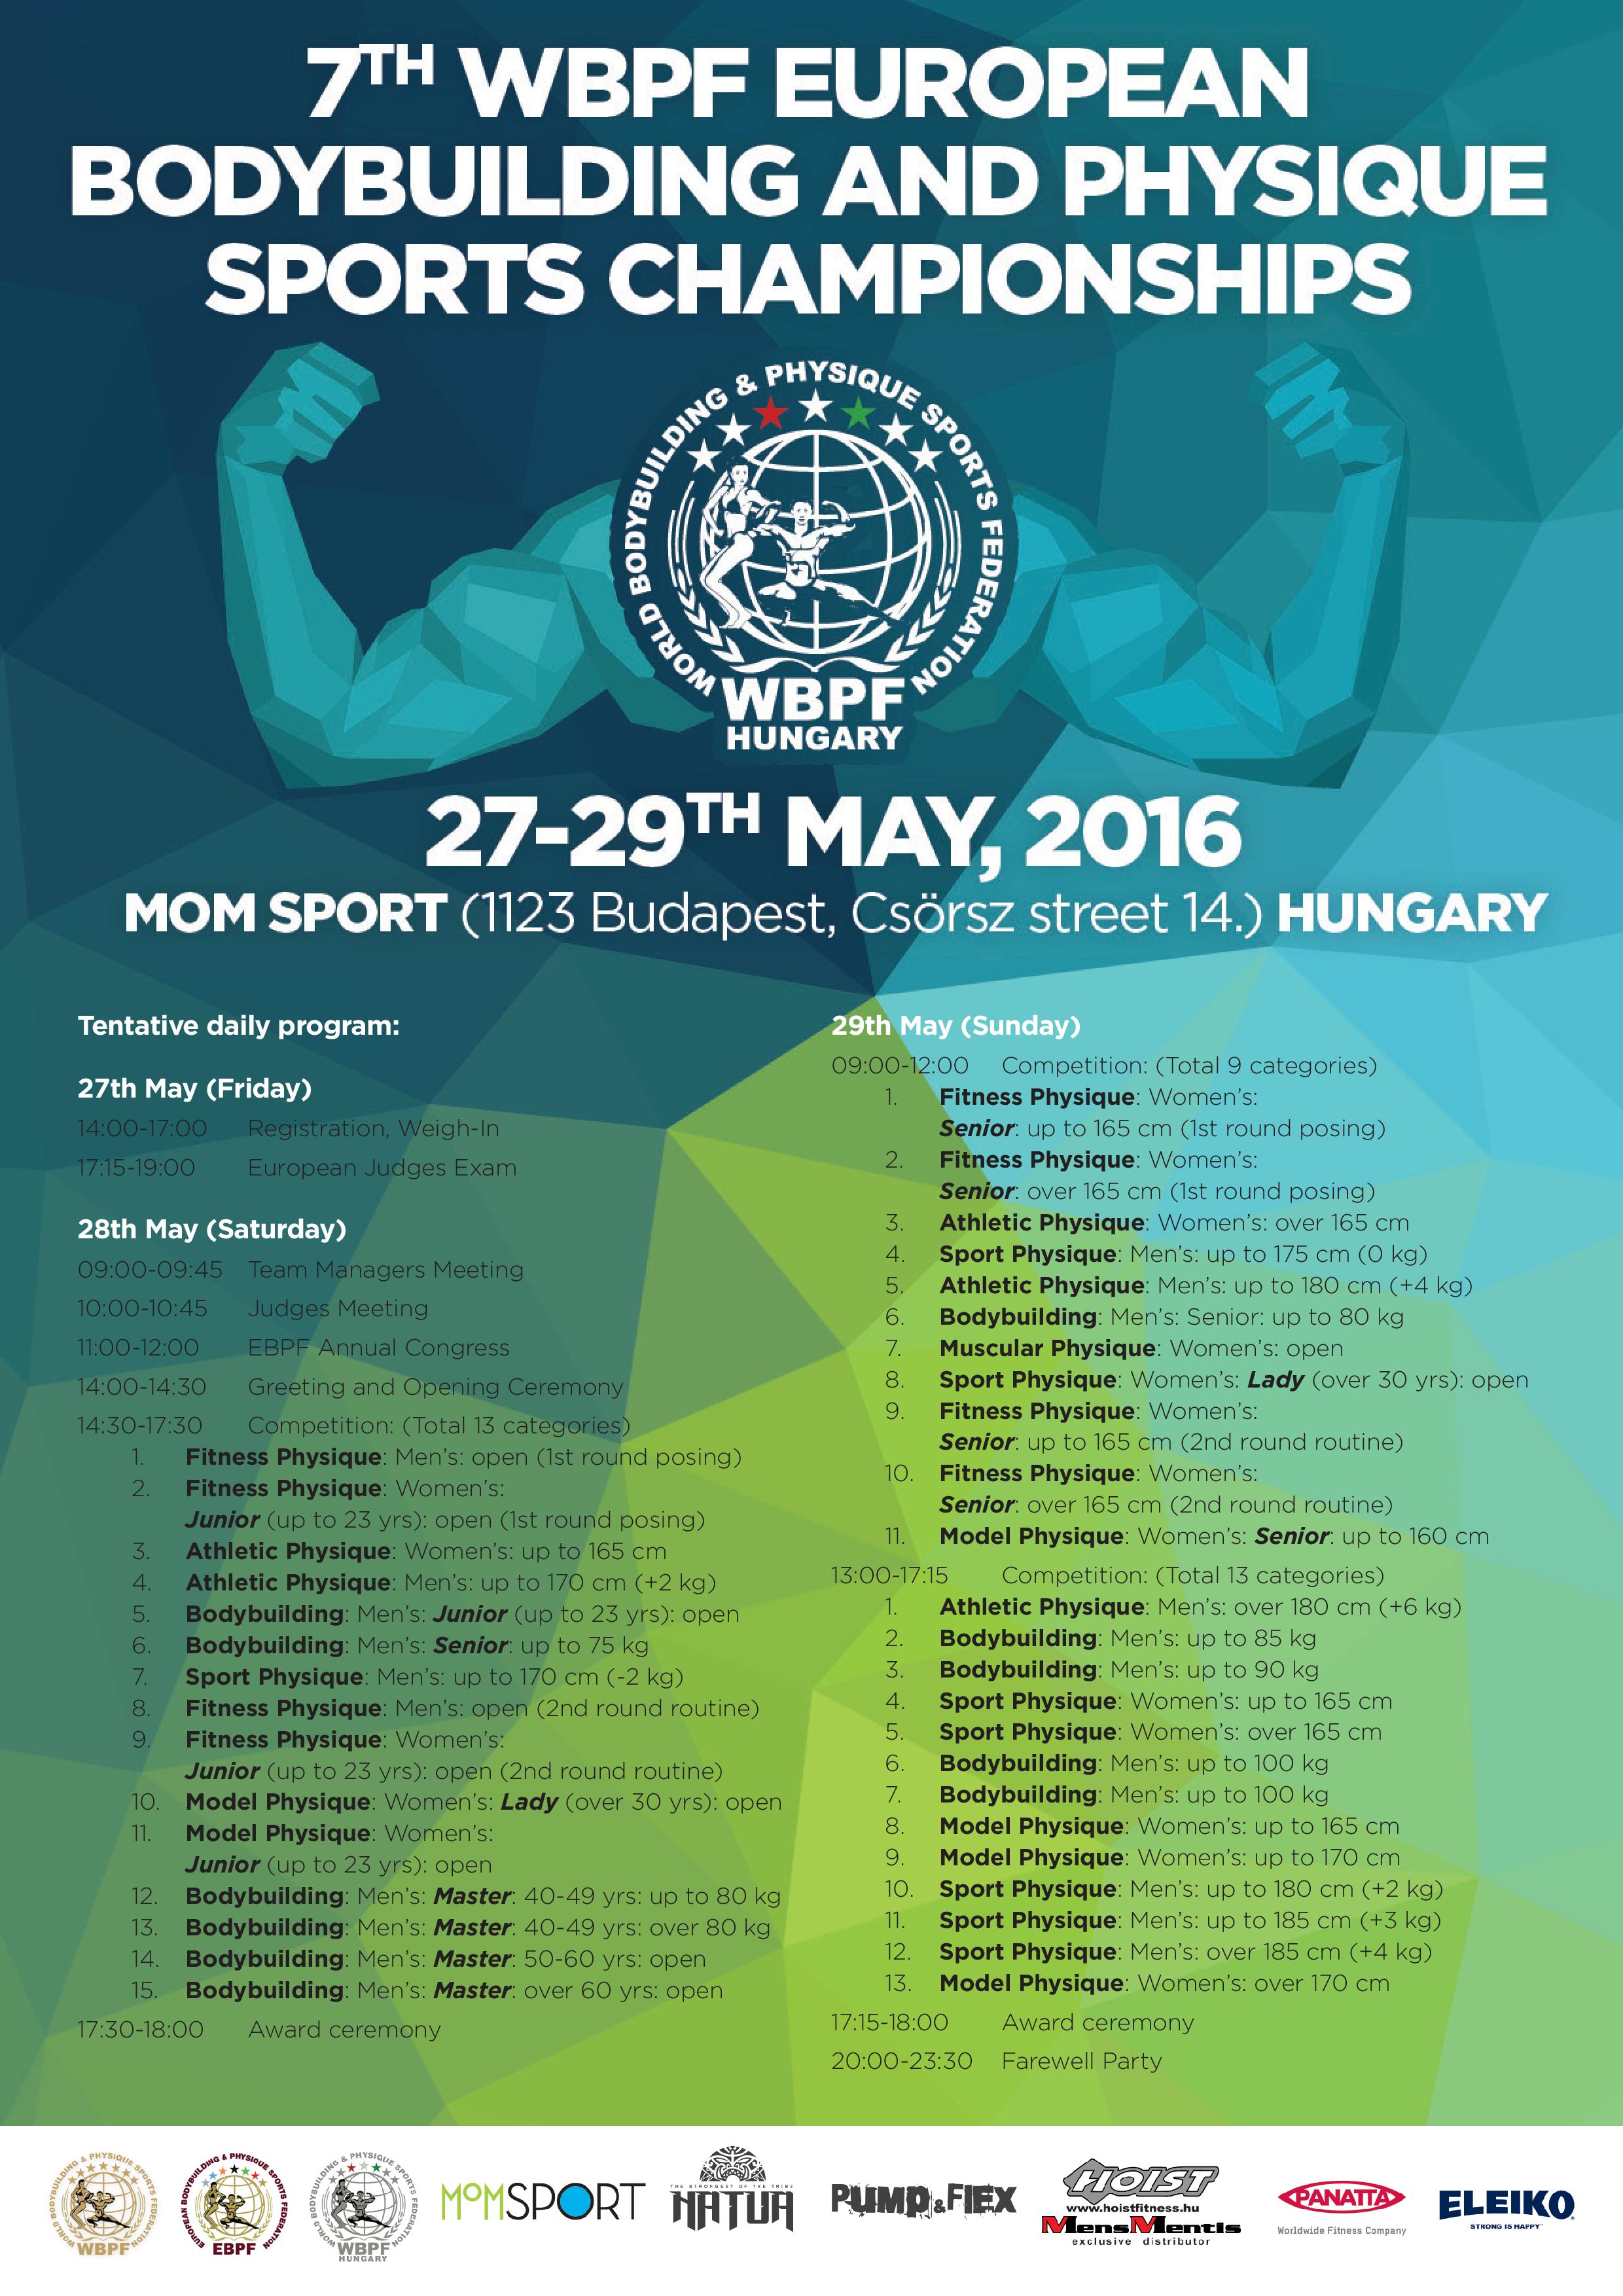 7TH WBPF EUROPEAN BODYBUILDING AND PHYSIQUE SPORTS CHAMPIONSHIPS_2016